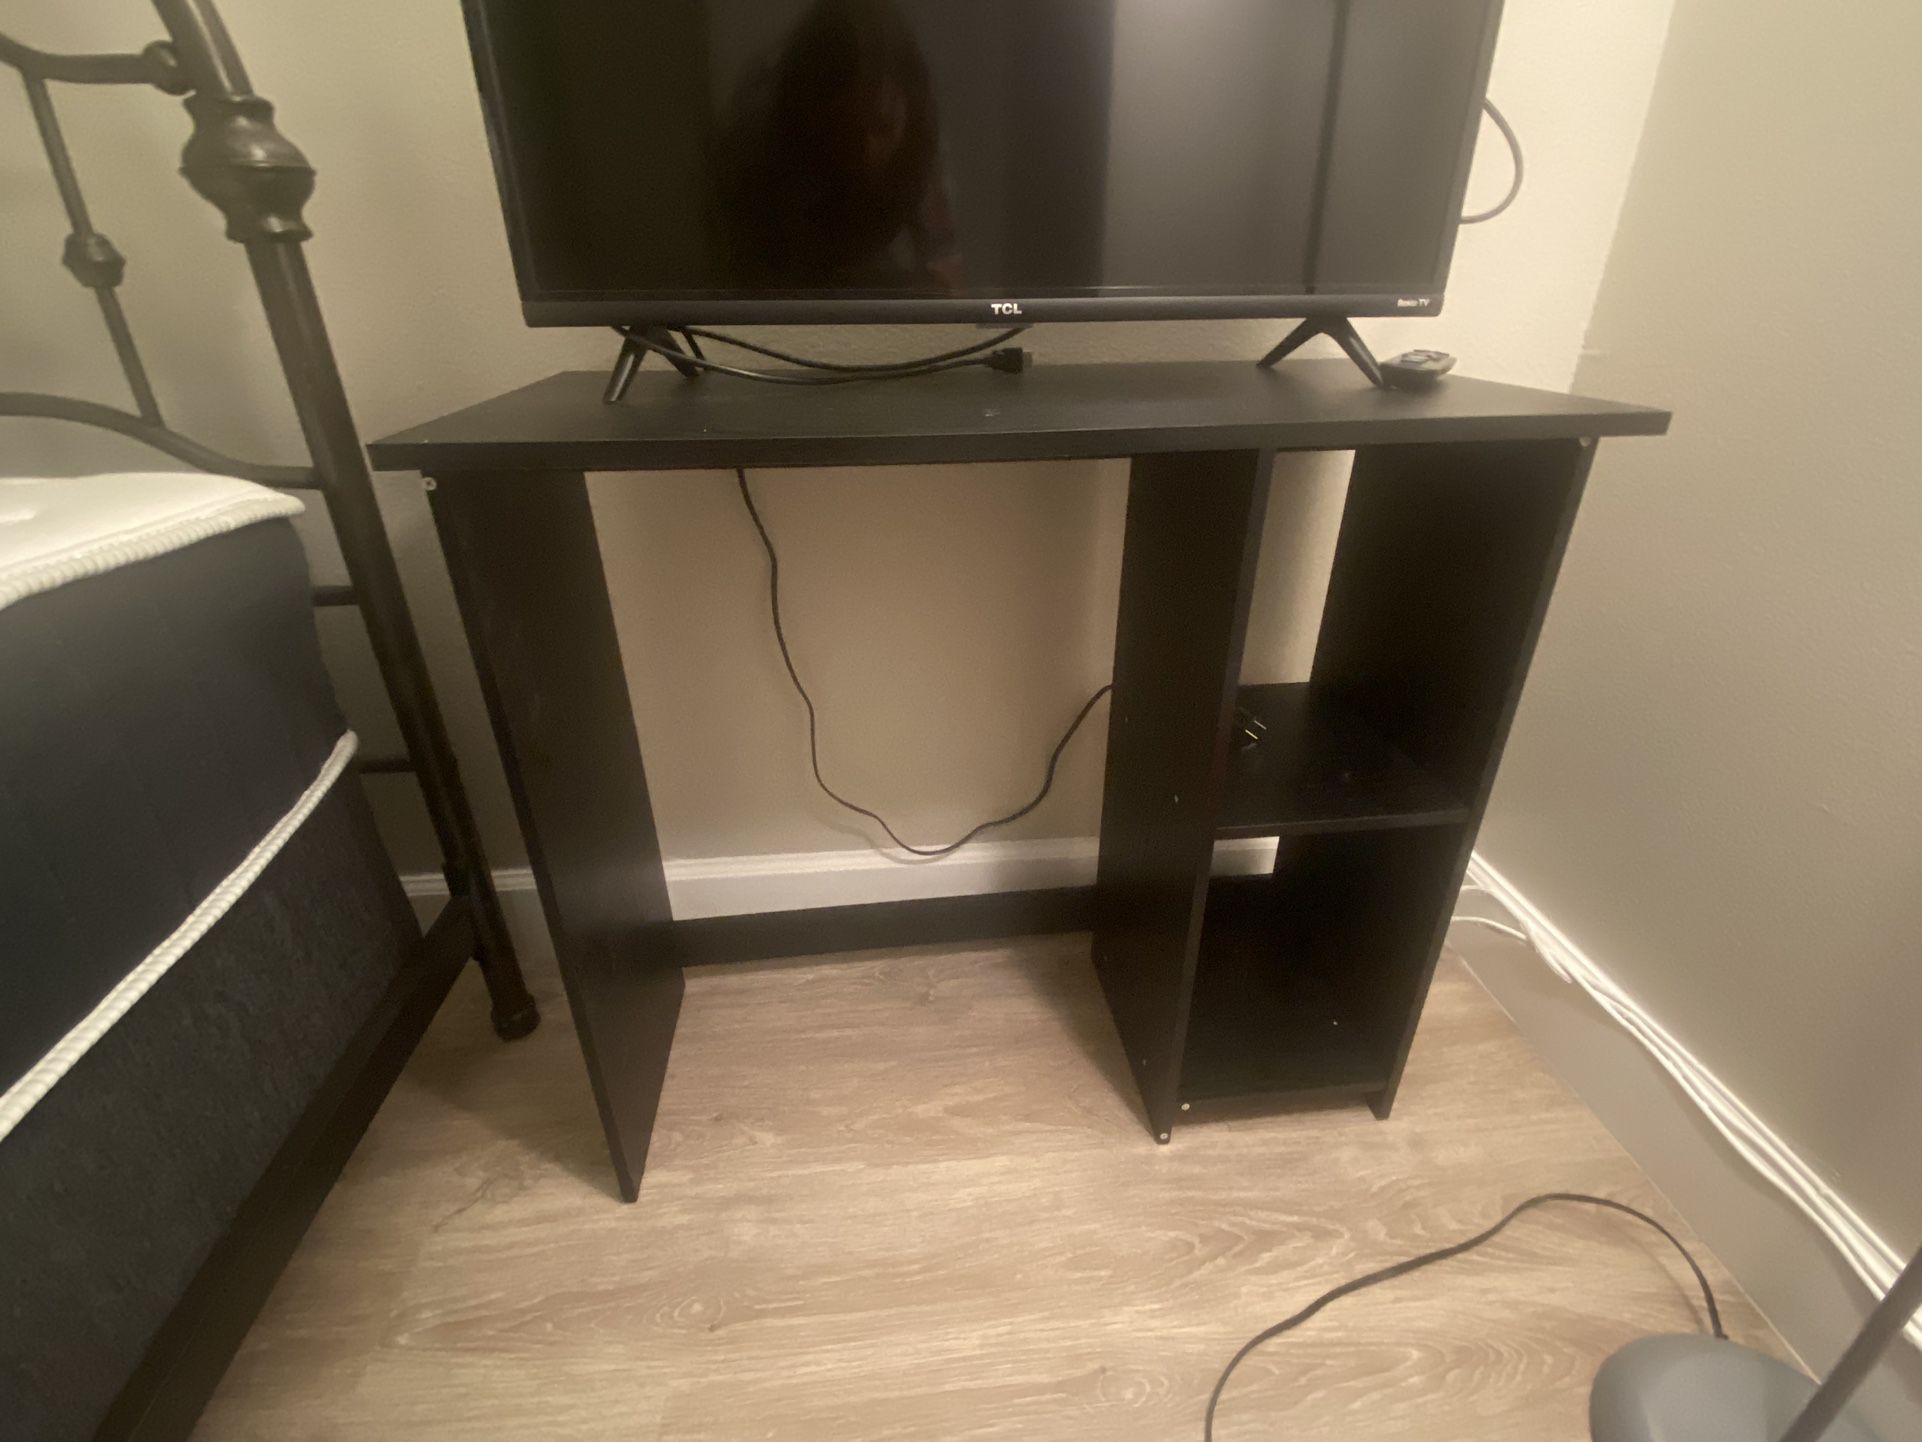 TV stand or Desk